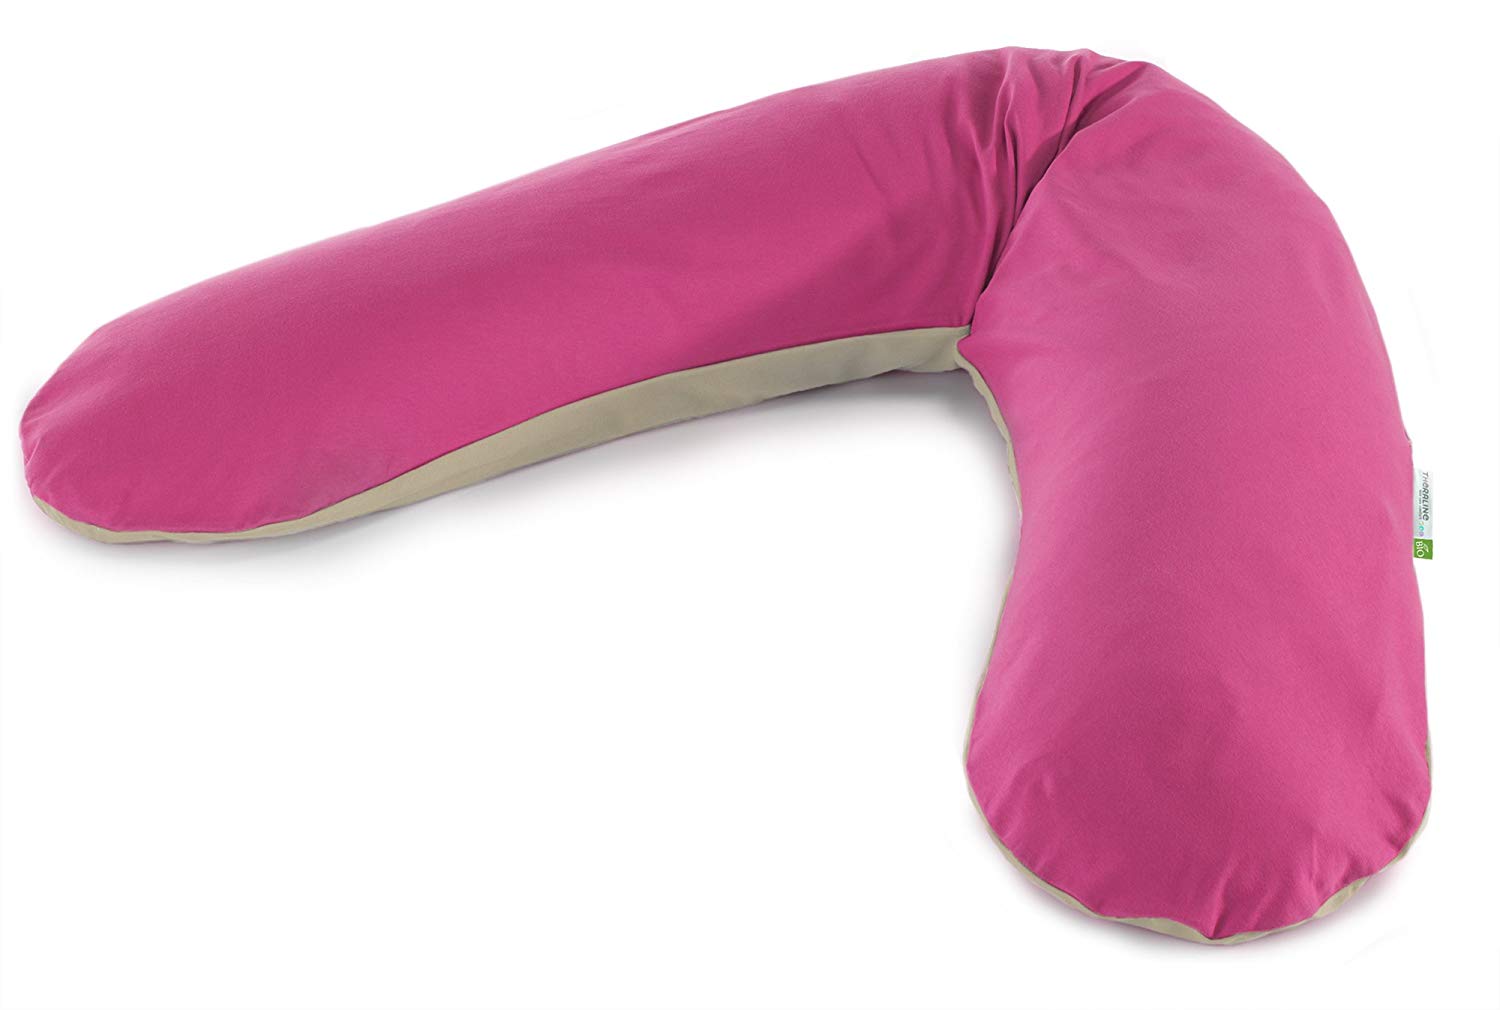 Theraline 51019802 The Original Cushion Made from Organic Fabrics Including Cover 190 cm Fuchsia / Cappuccino